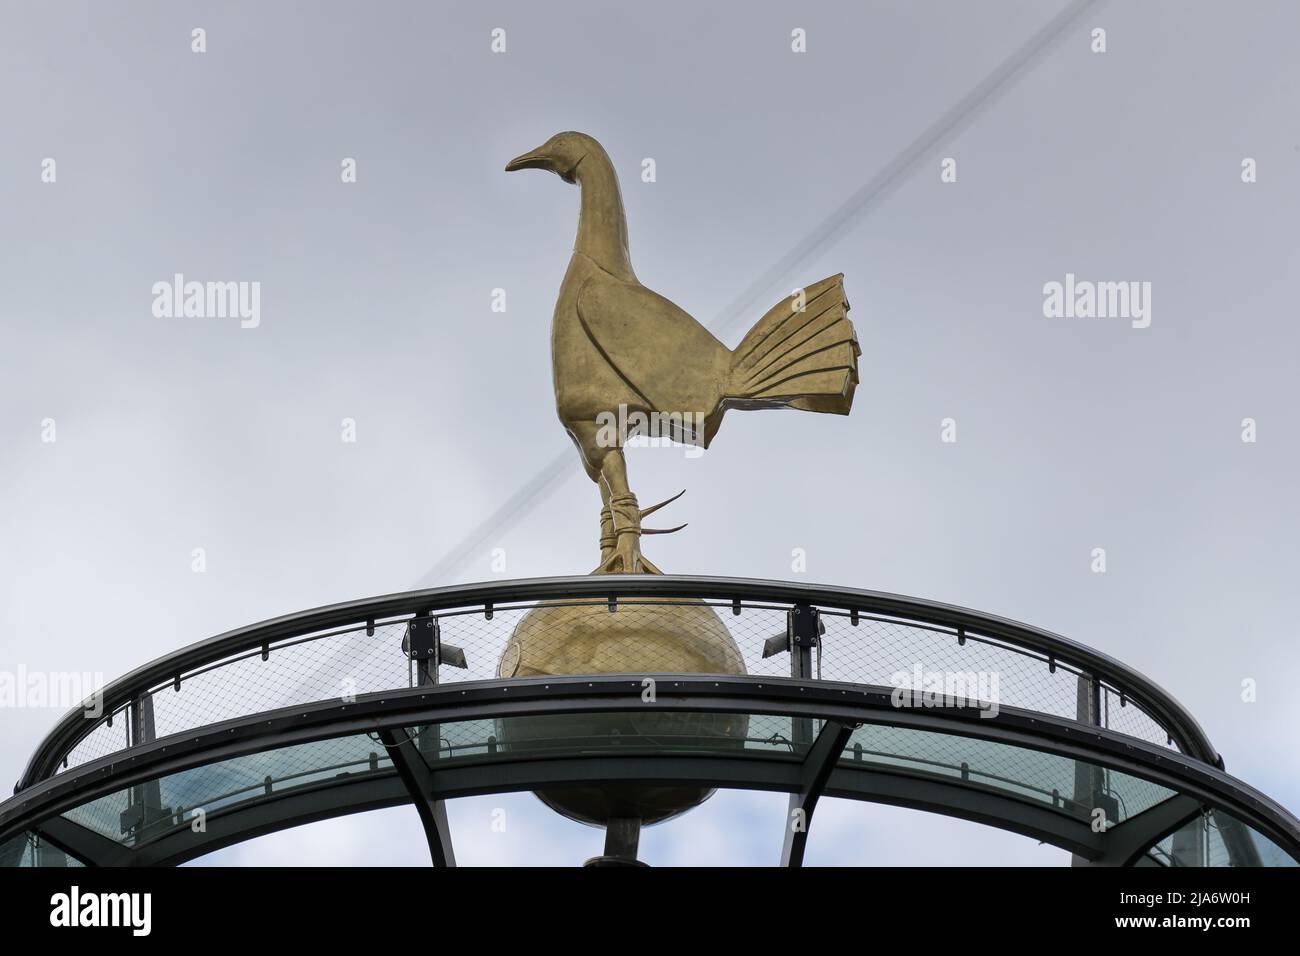 London, UK. 28th May, 2022. The golden cockerel on top of The Tottenham Hotspur Stadium ahead of today's game in London, United Kingdom on 5/28/2022. (Photo by James Heaton Via/News Images/Sipa USA) Credit: Sipa USA/Alamy Live News Stock Photo